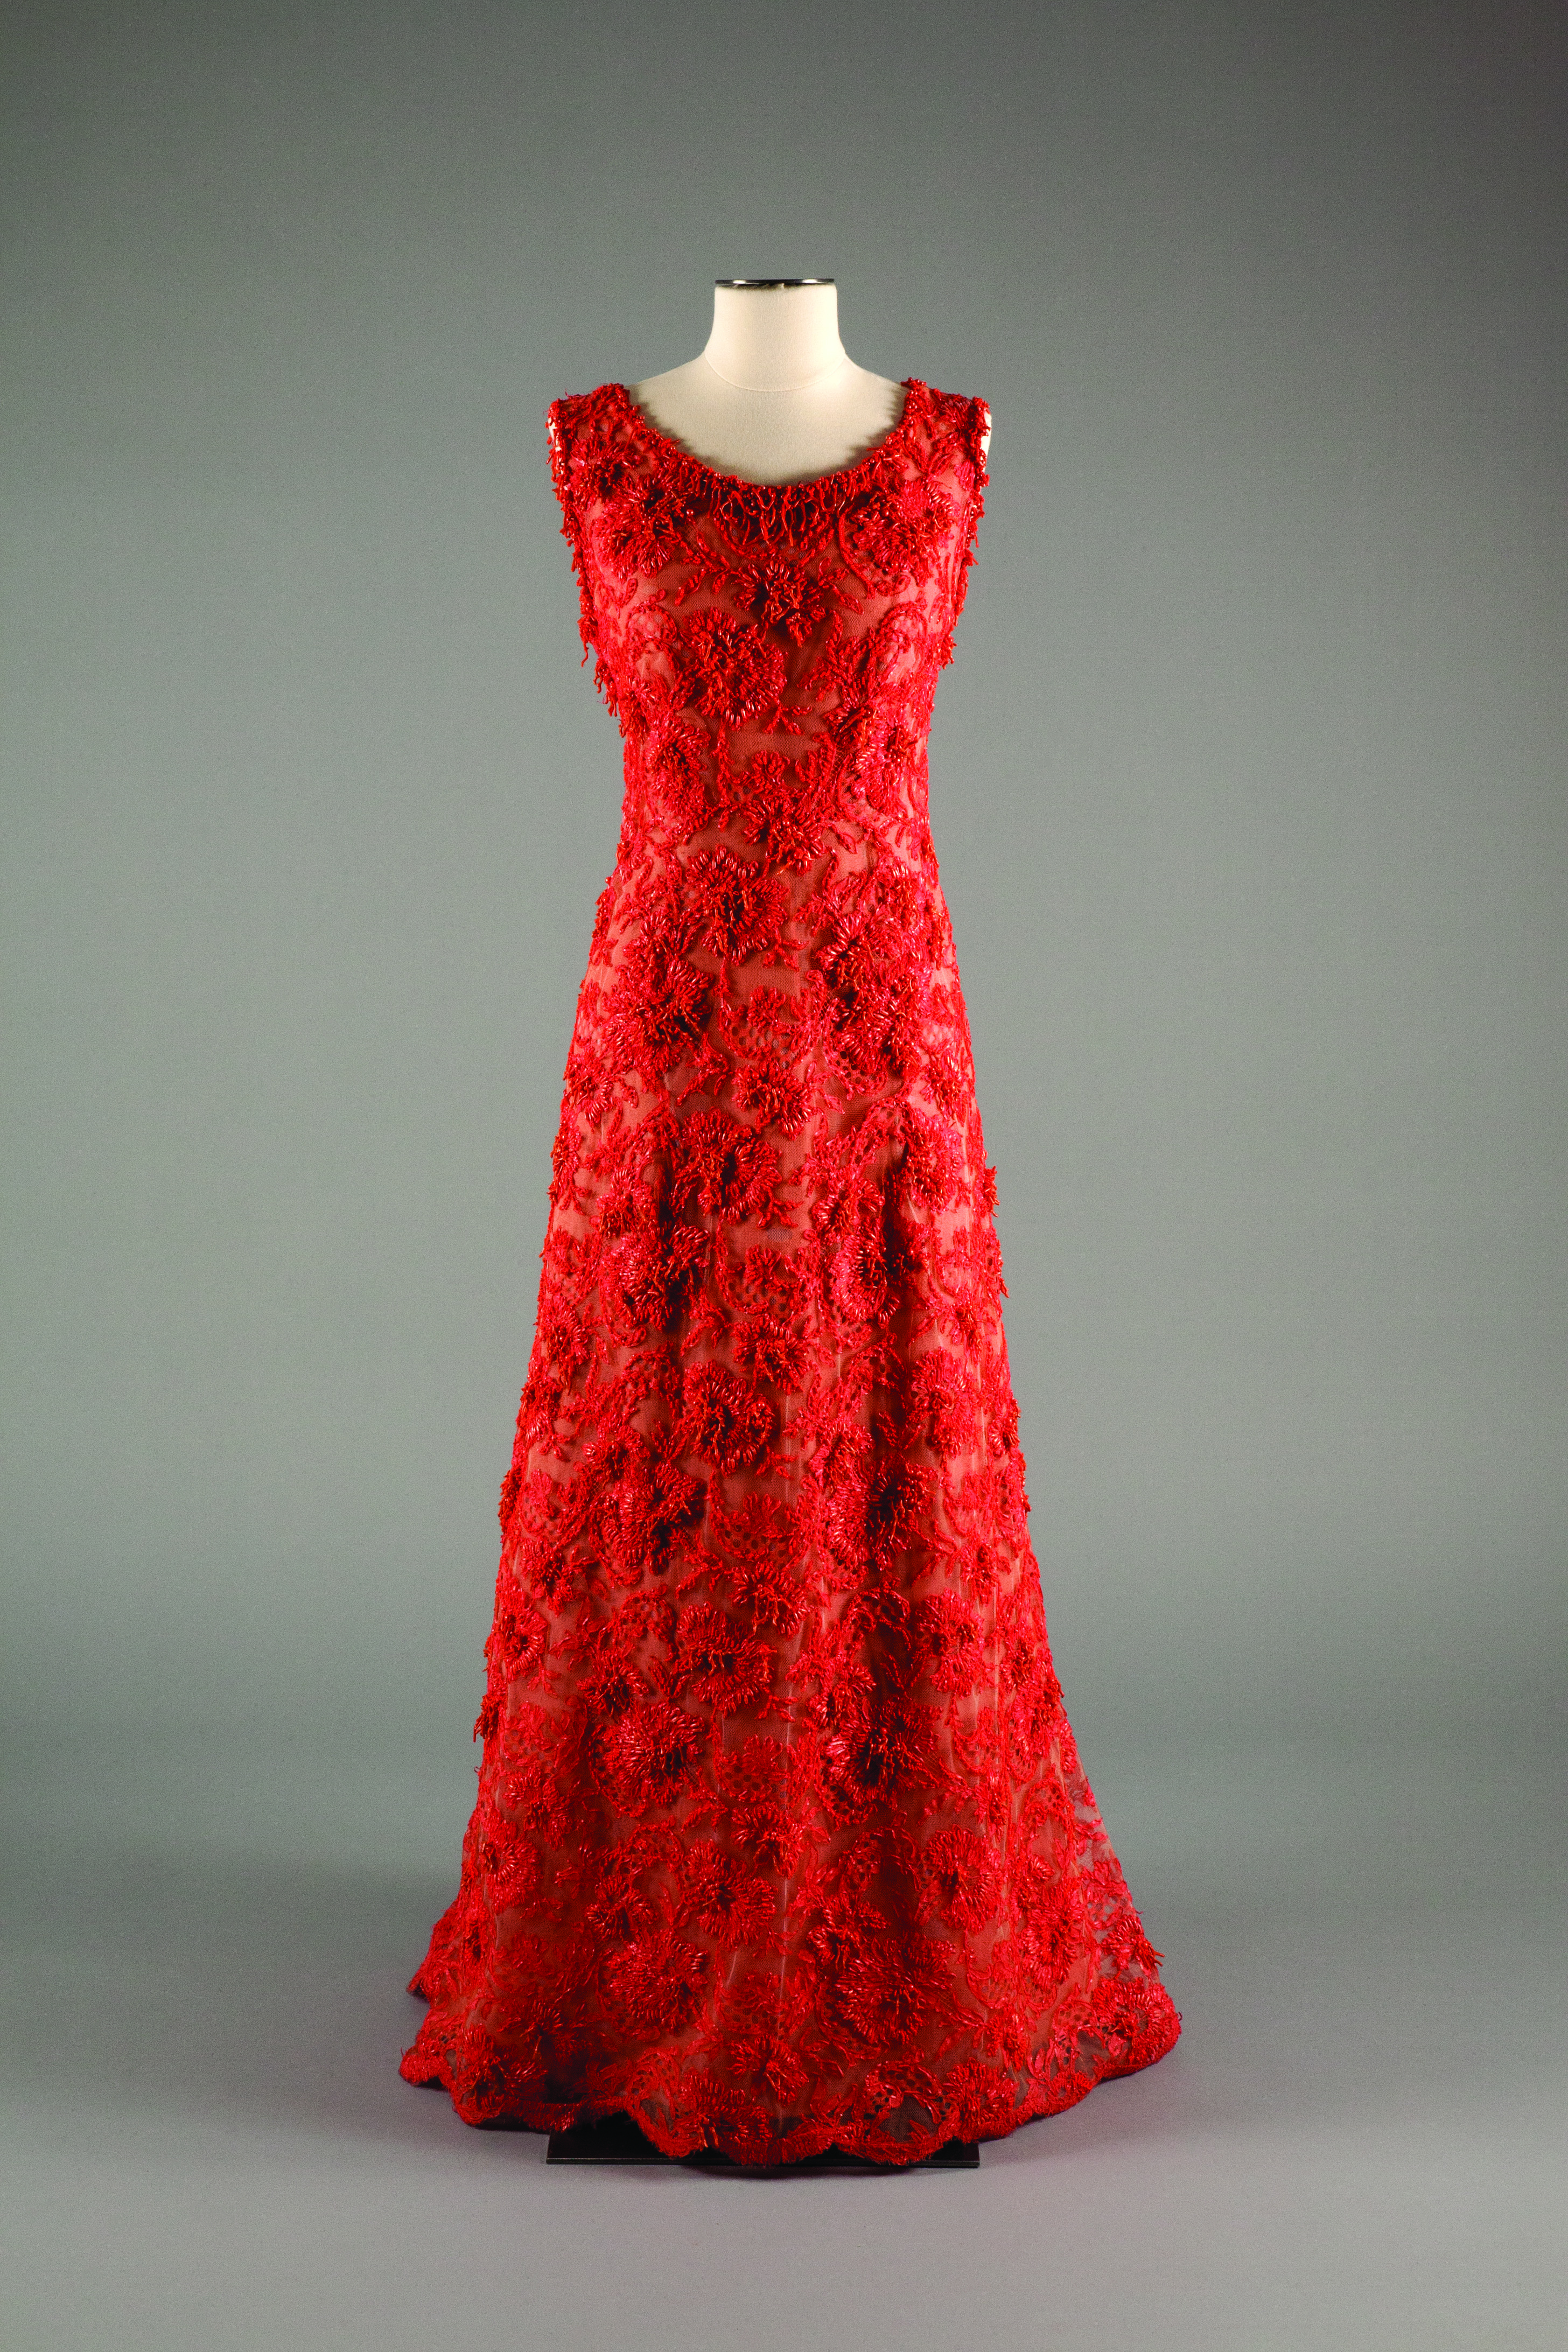 Hubert de Givenchy coral and lace evening gown worn by Her Serene Highness, Prince Grace of Monaco, circa 1964 France. 